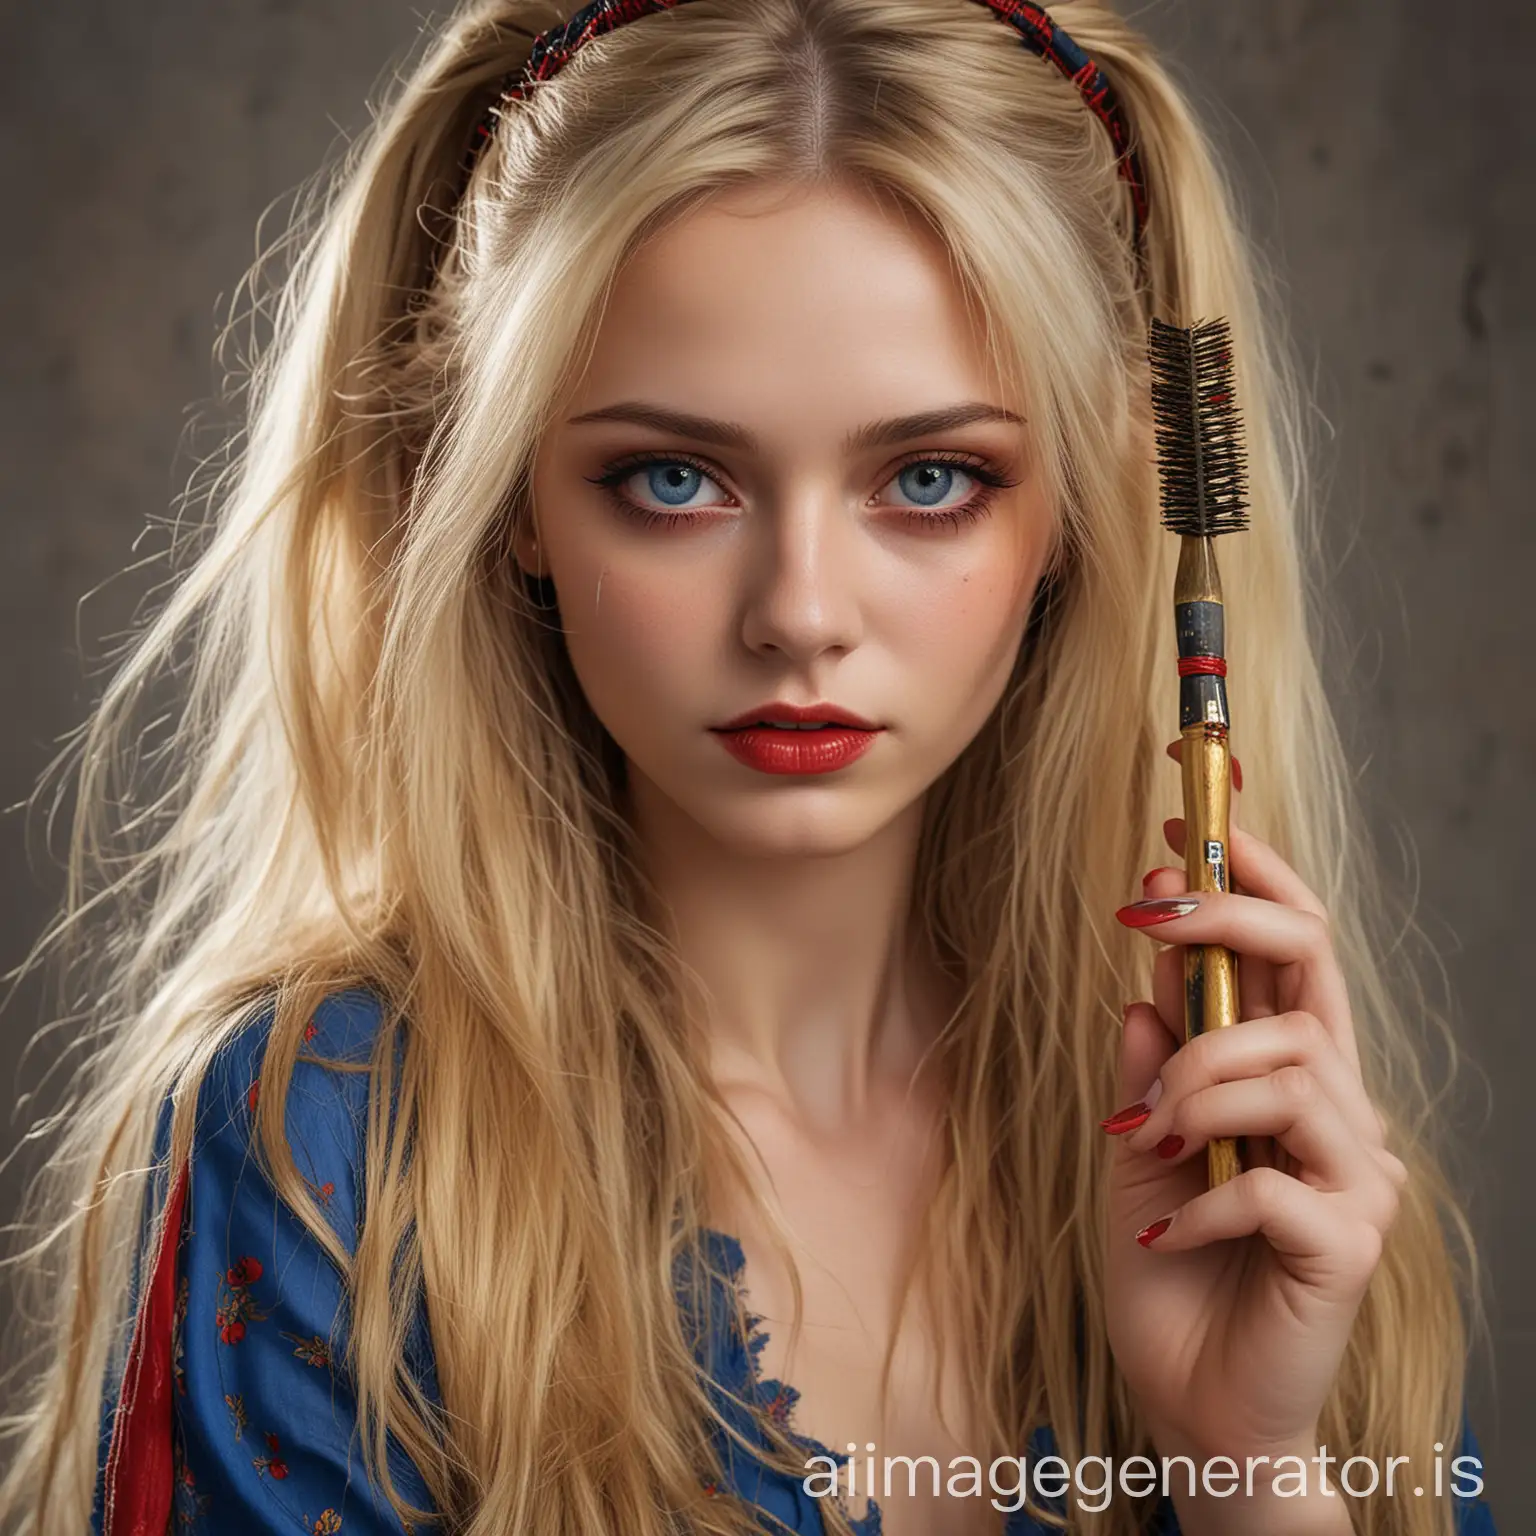 Enchanting-Blonde-Woman-with-Piercing-Red-Eyes-Holding-a-Golden-Brush-in-Ragged-Attire